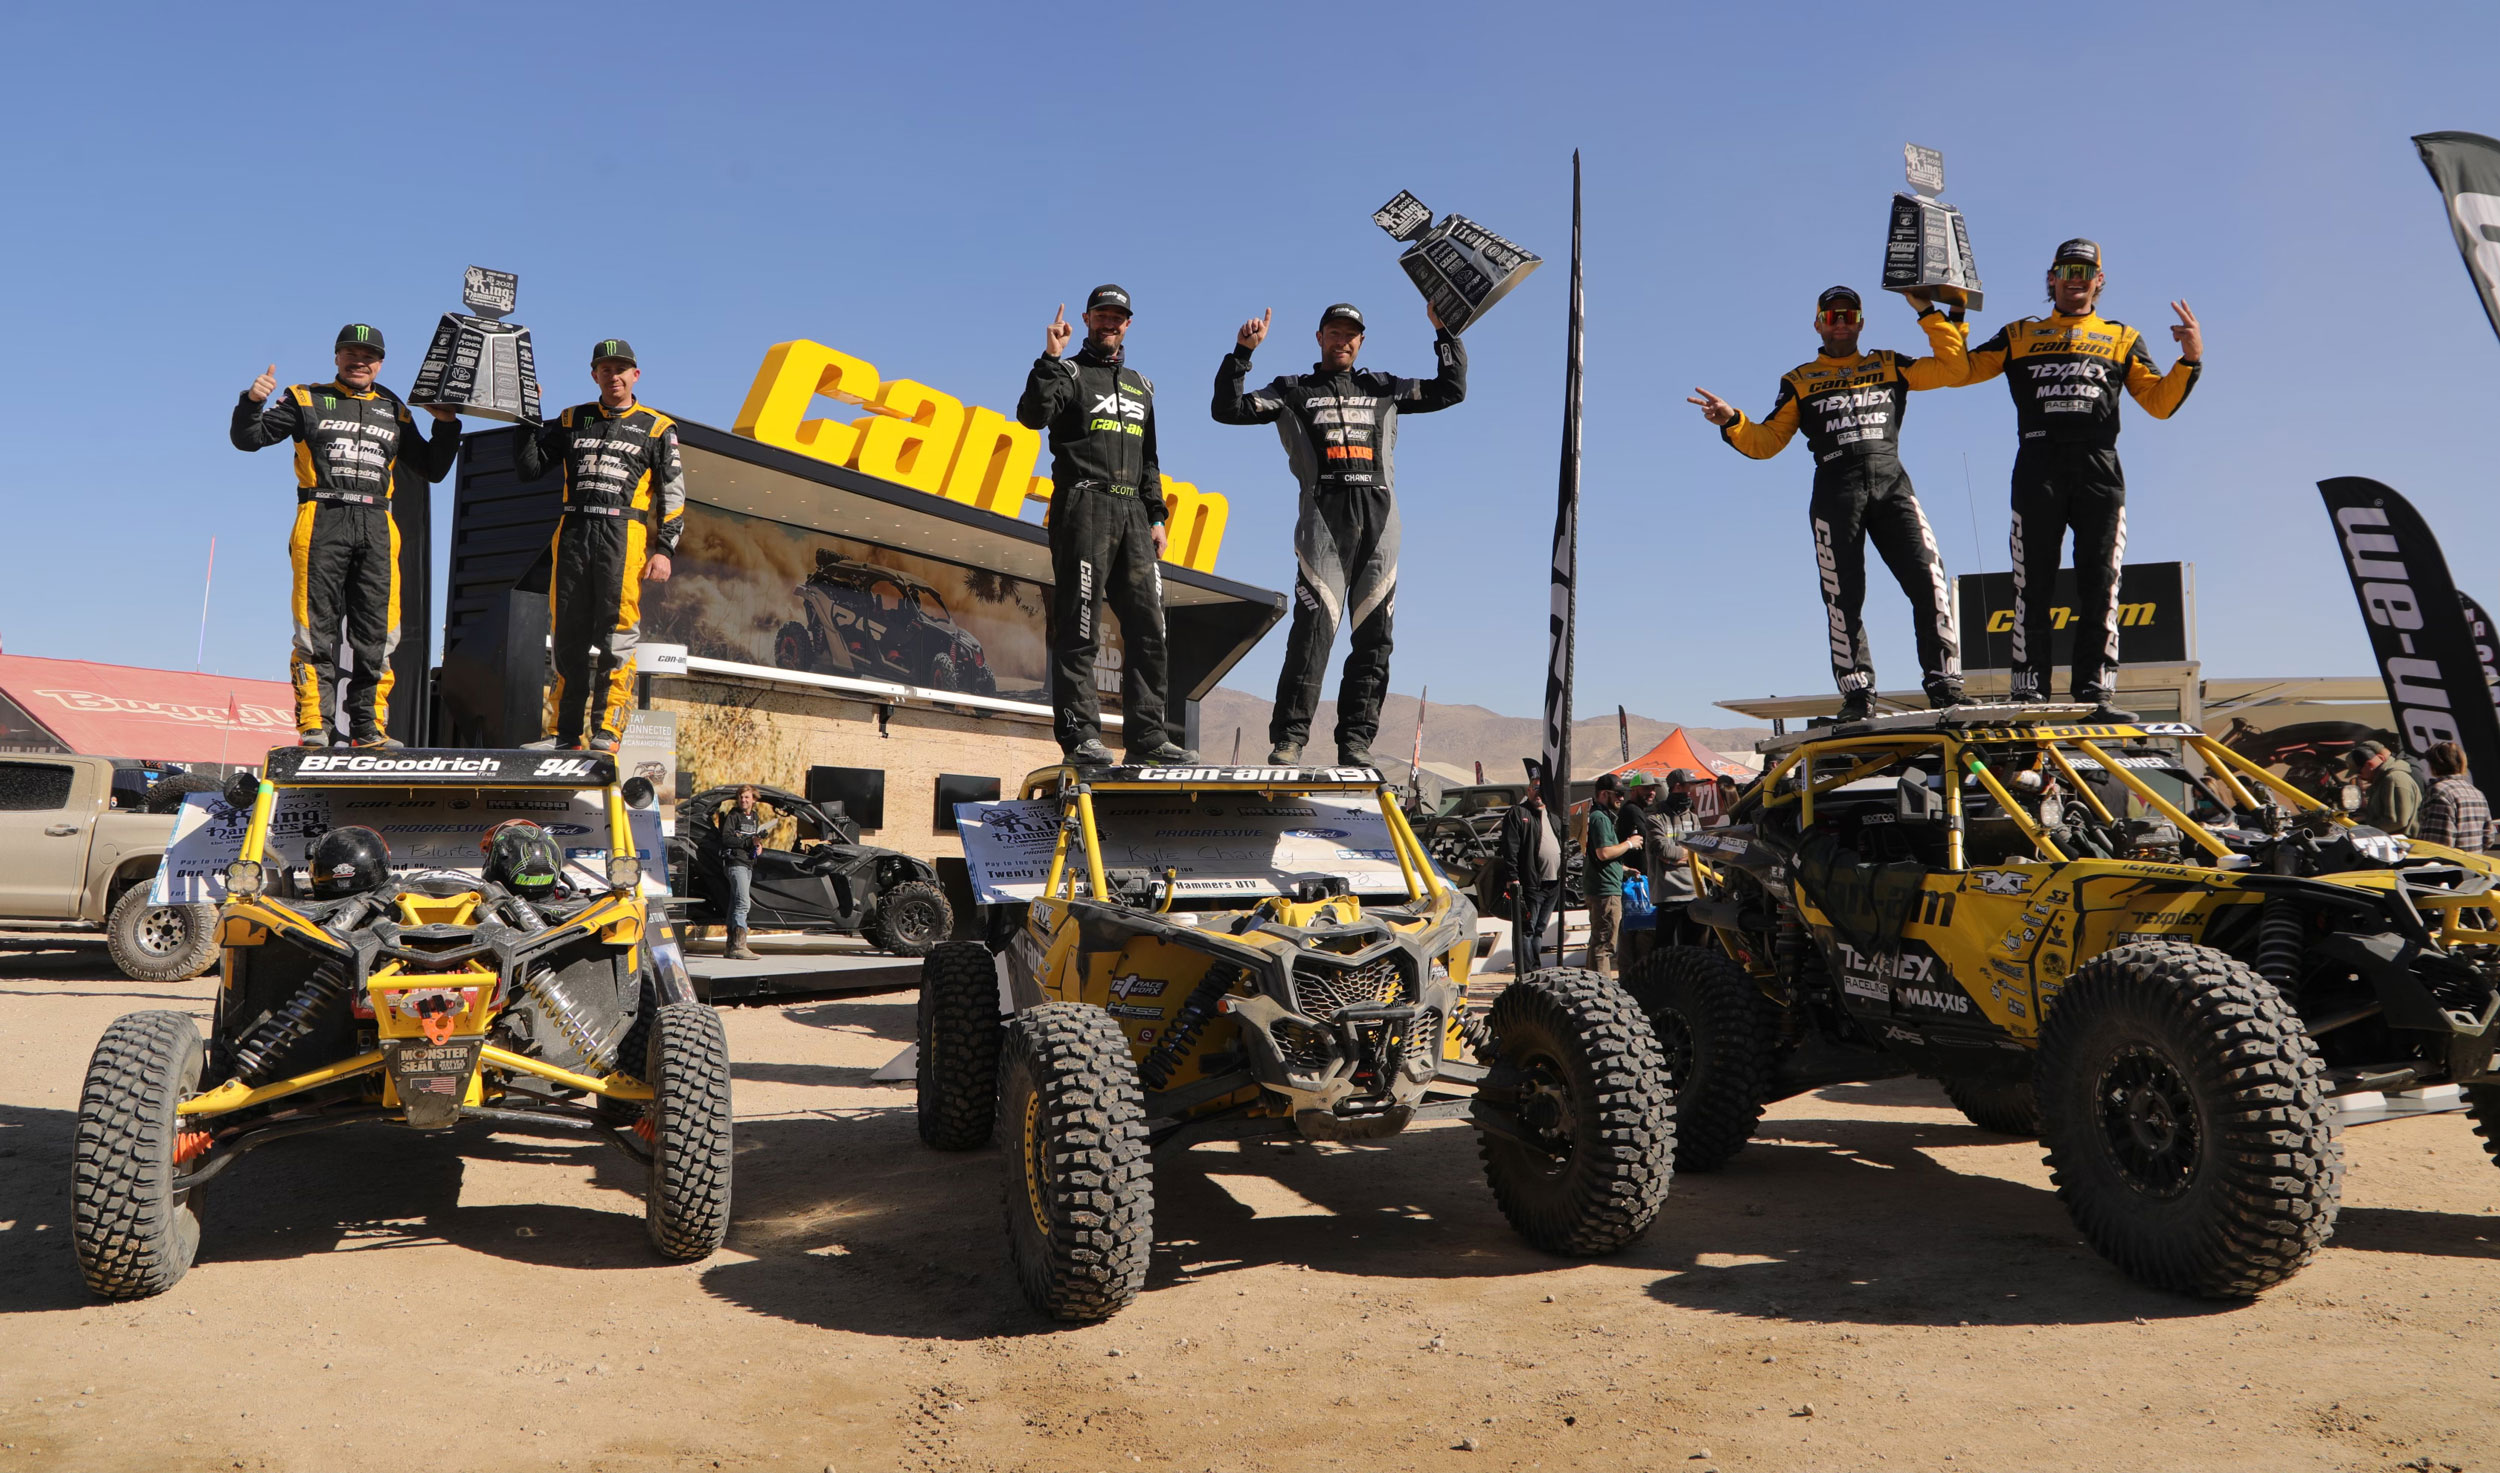 2021 King of the hammers Can-Am podium win